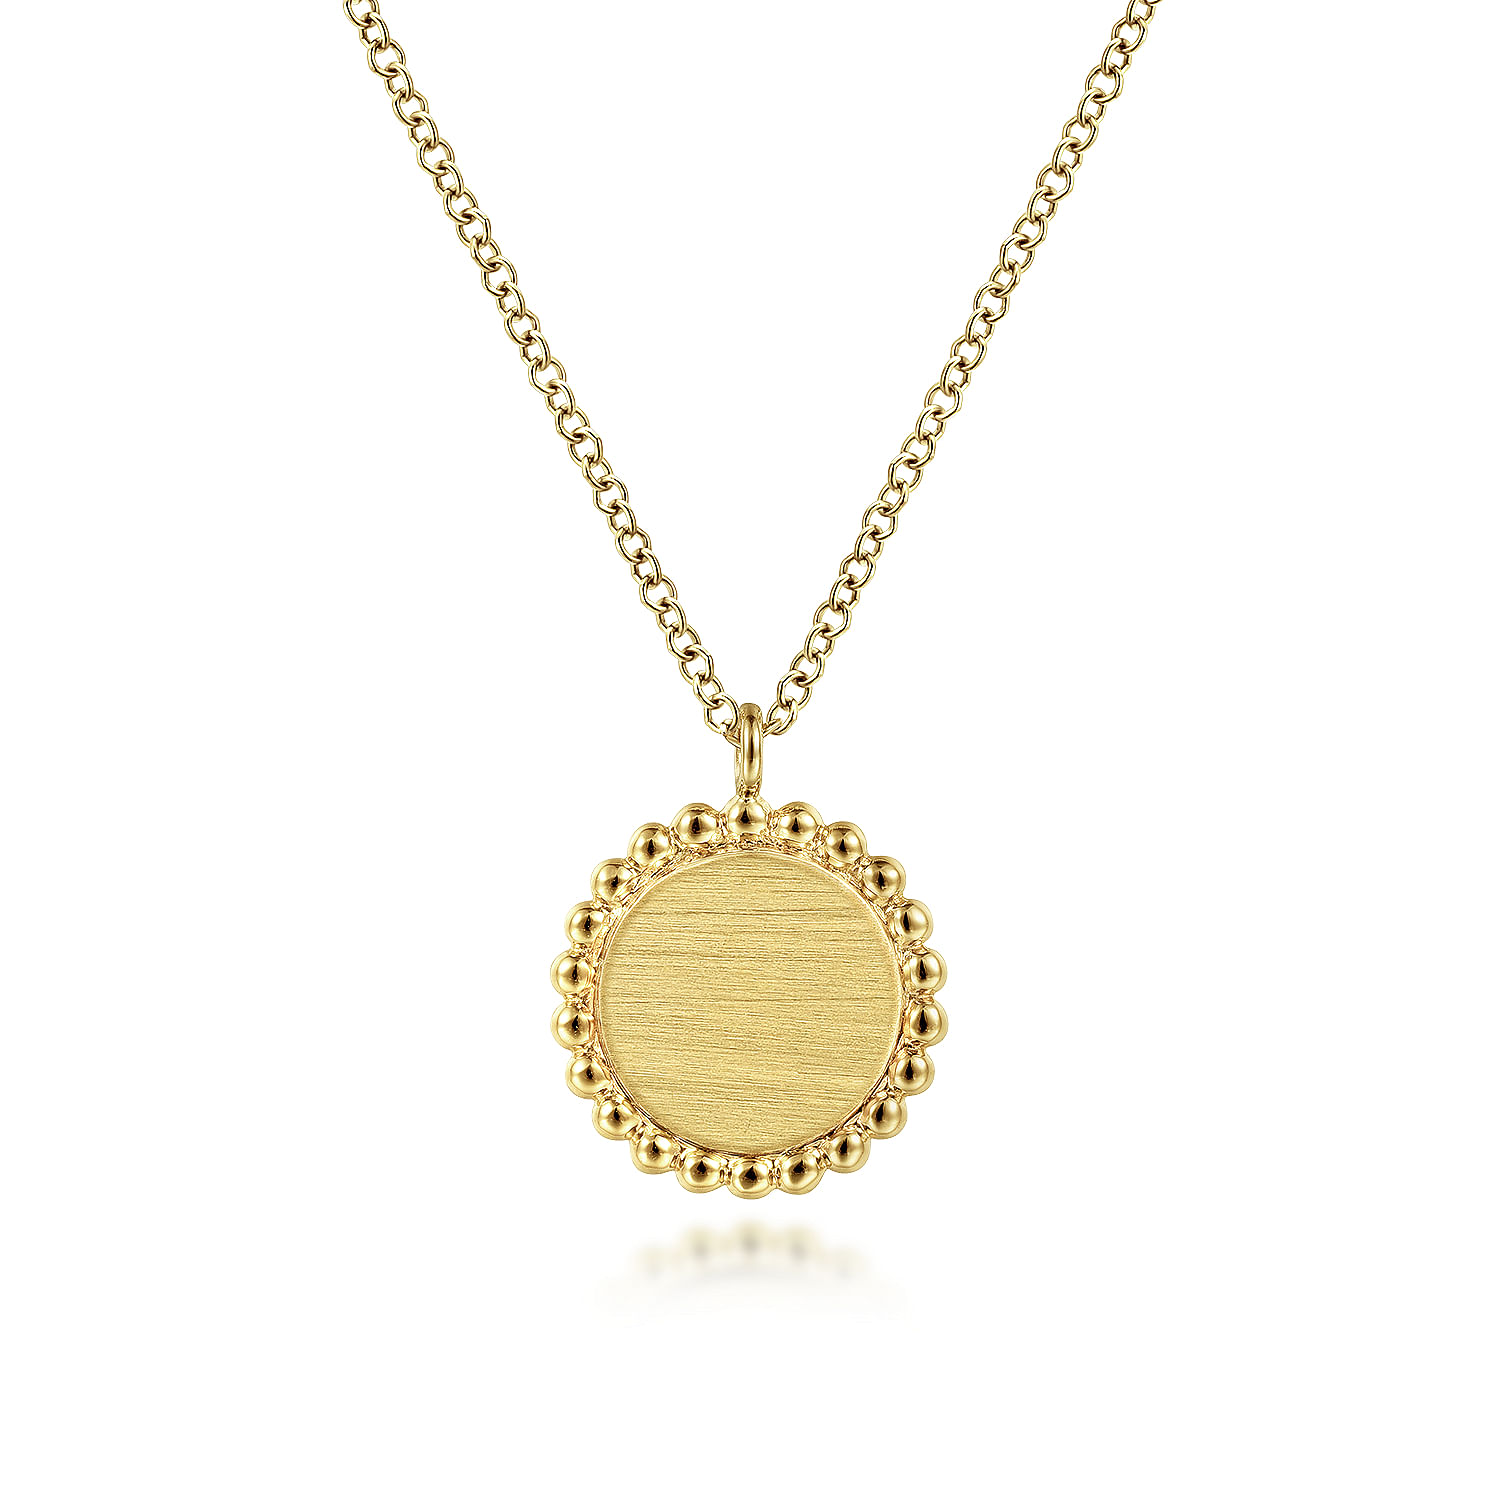 14K Yellow Gold Round Pendant Necklace with Bujukan Bead Frame